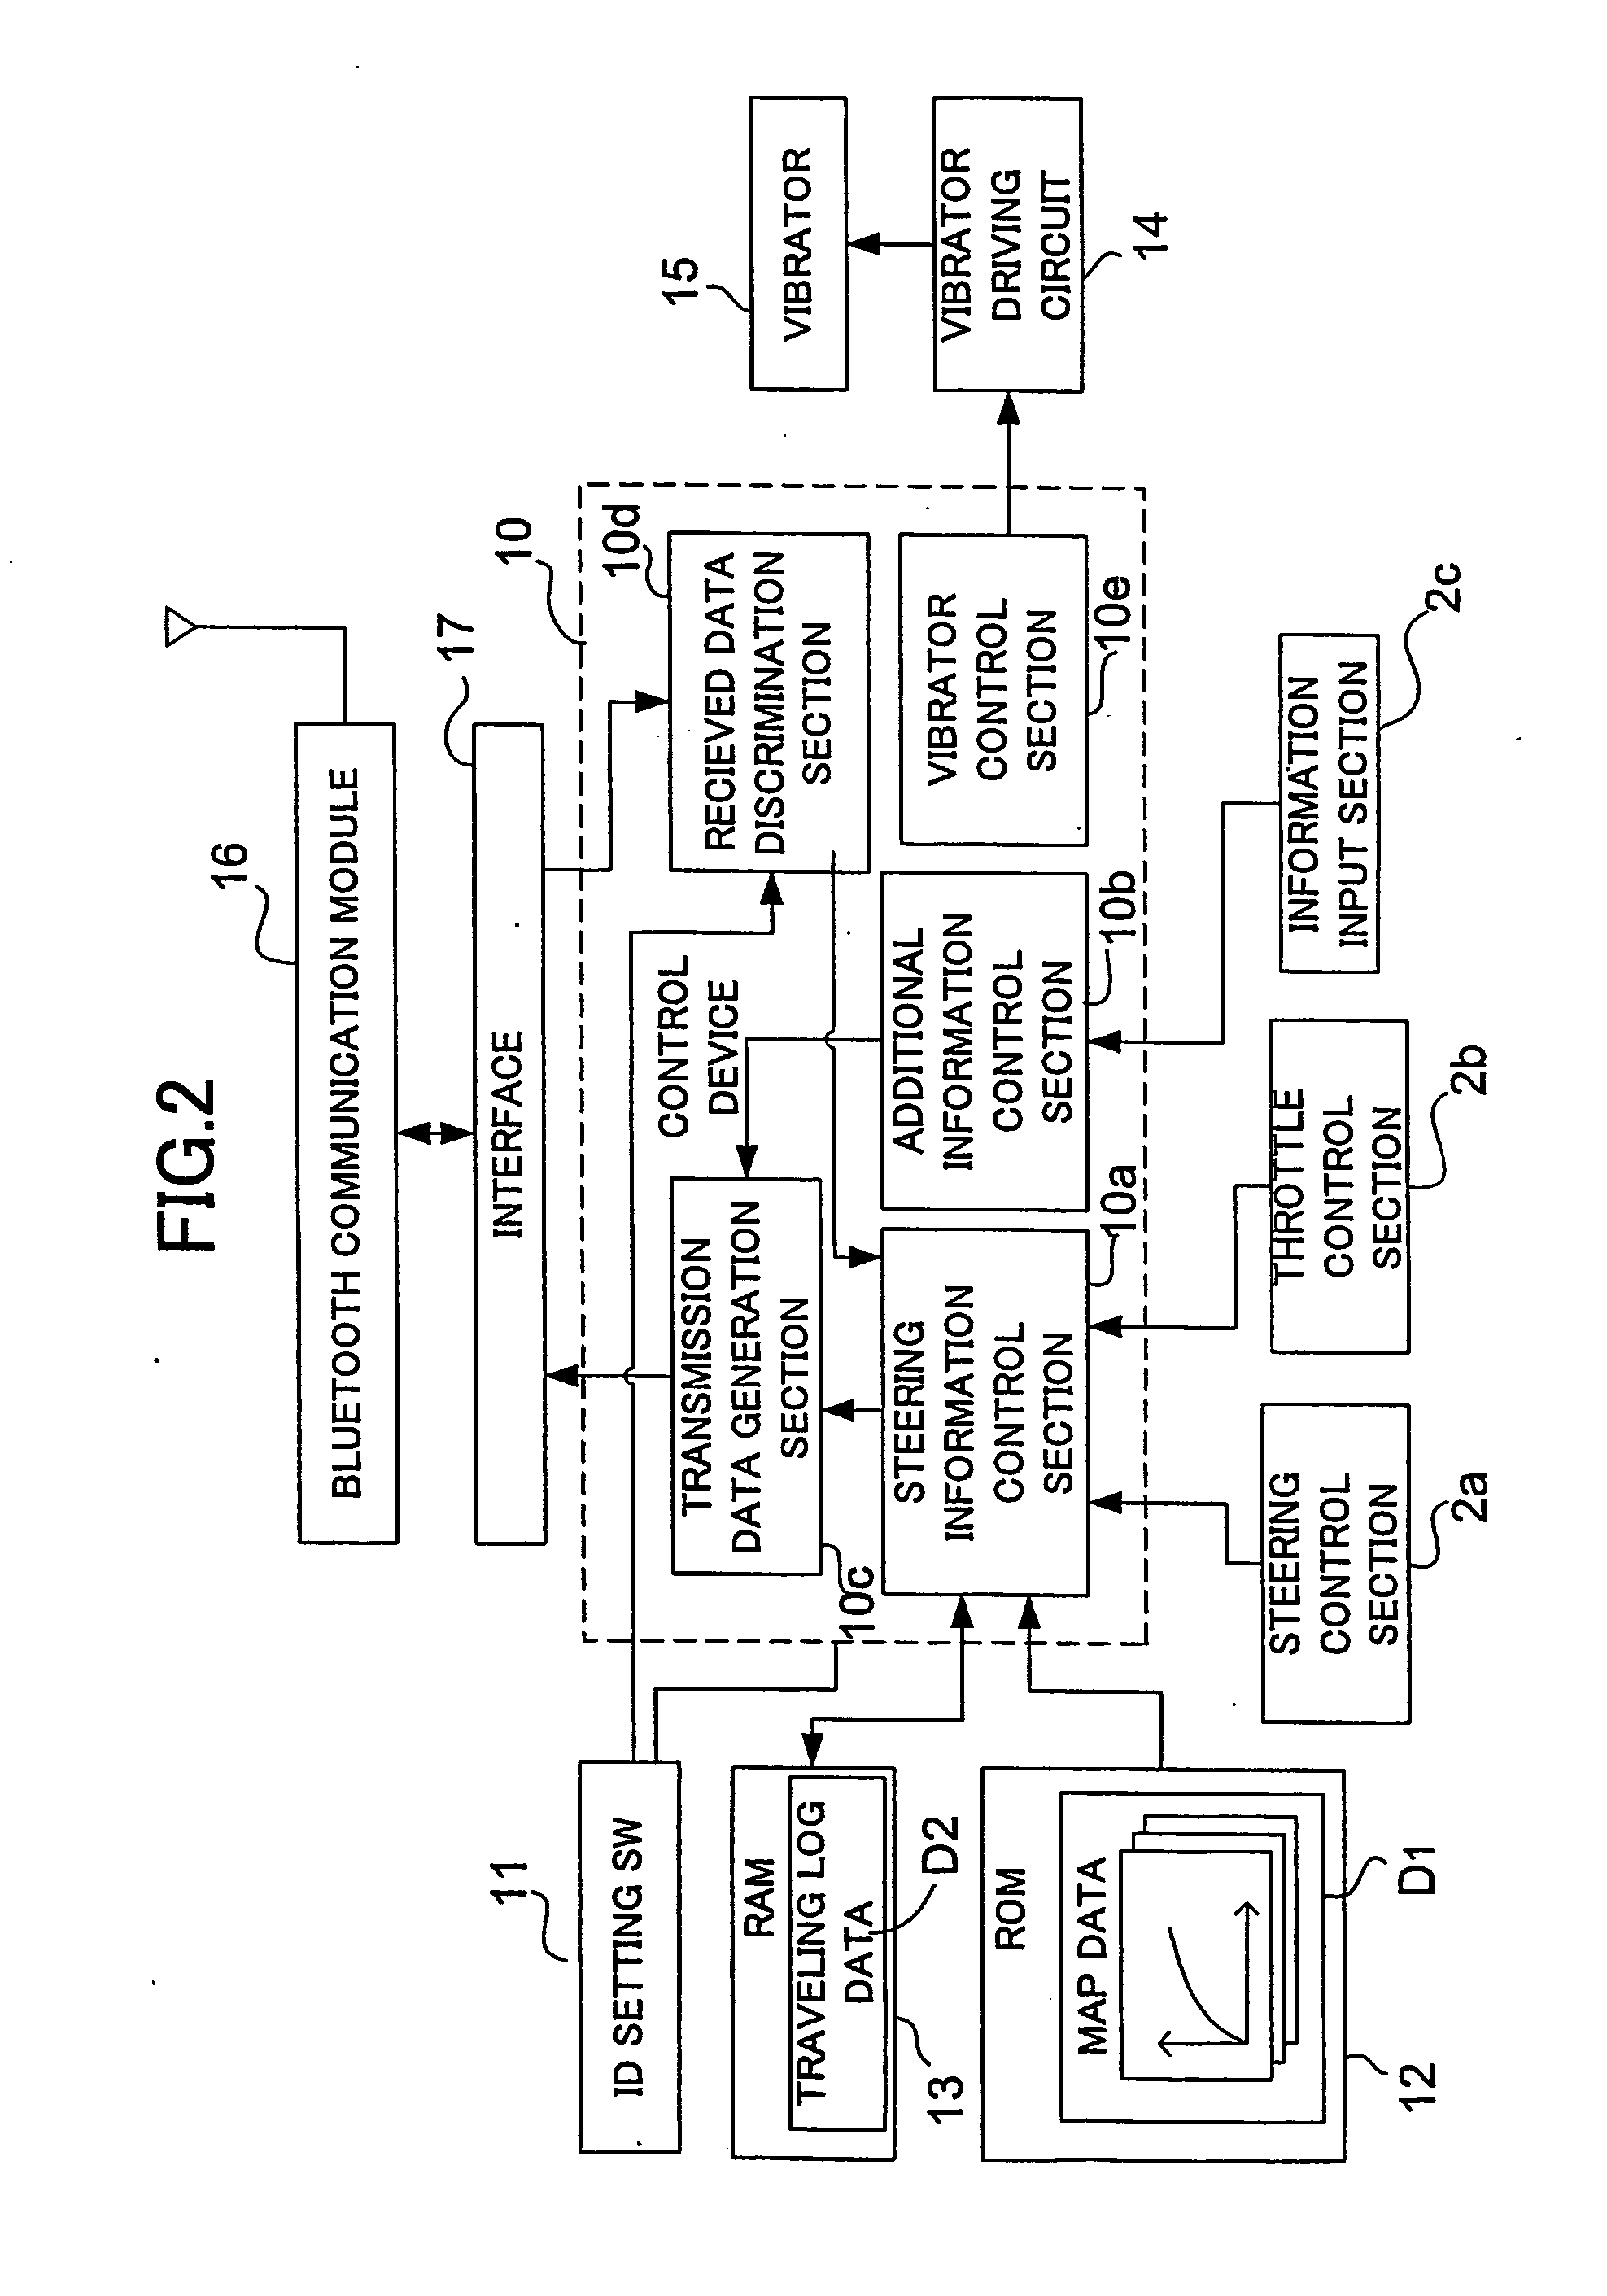 Remote control toy system, and controller, model and accessory device to be used in the same